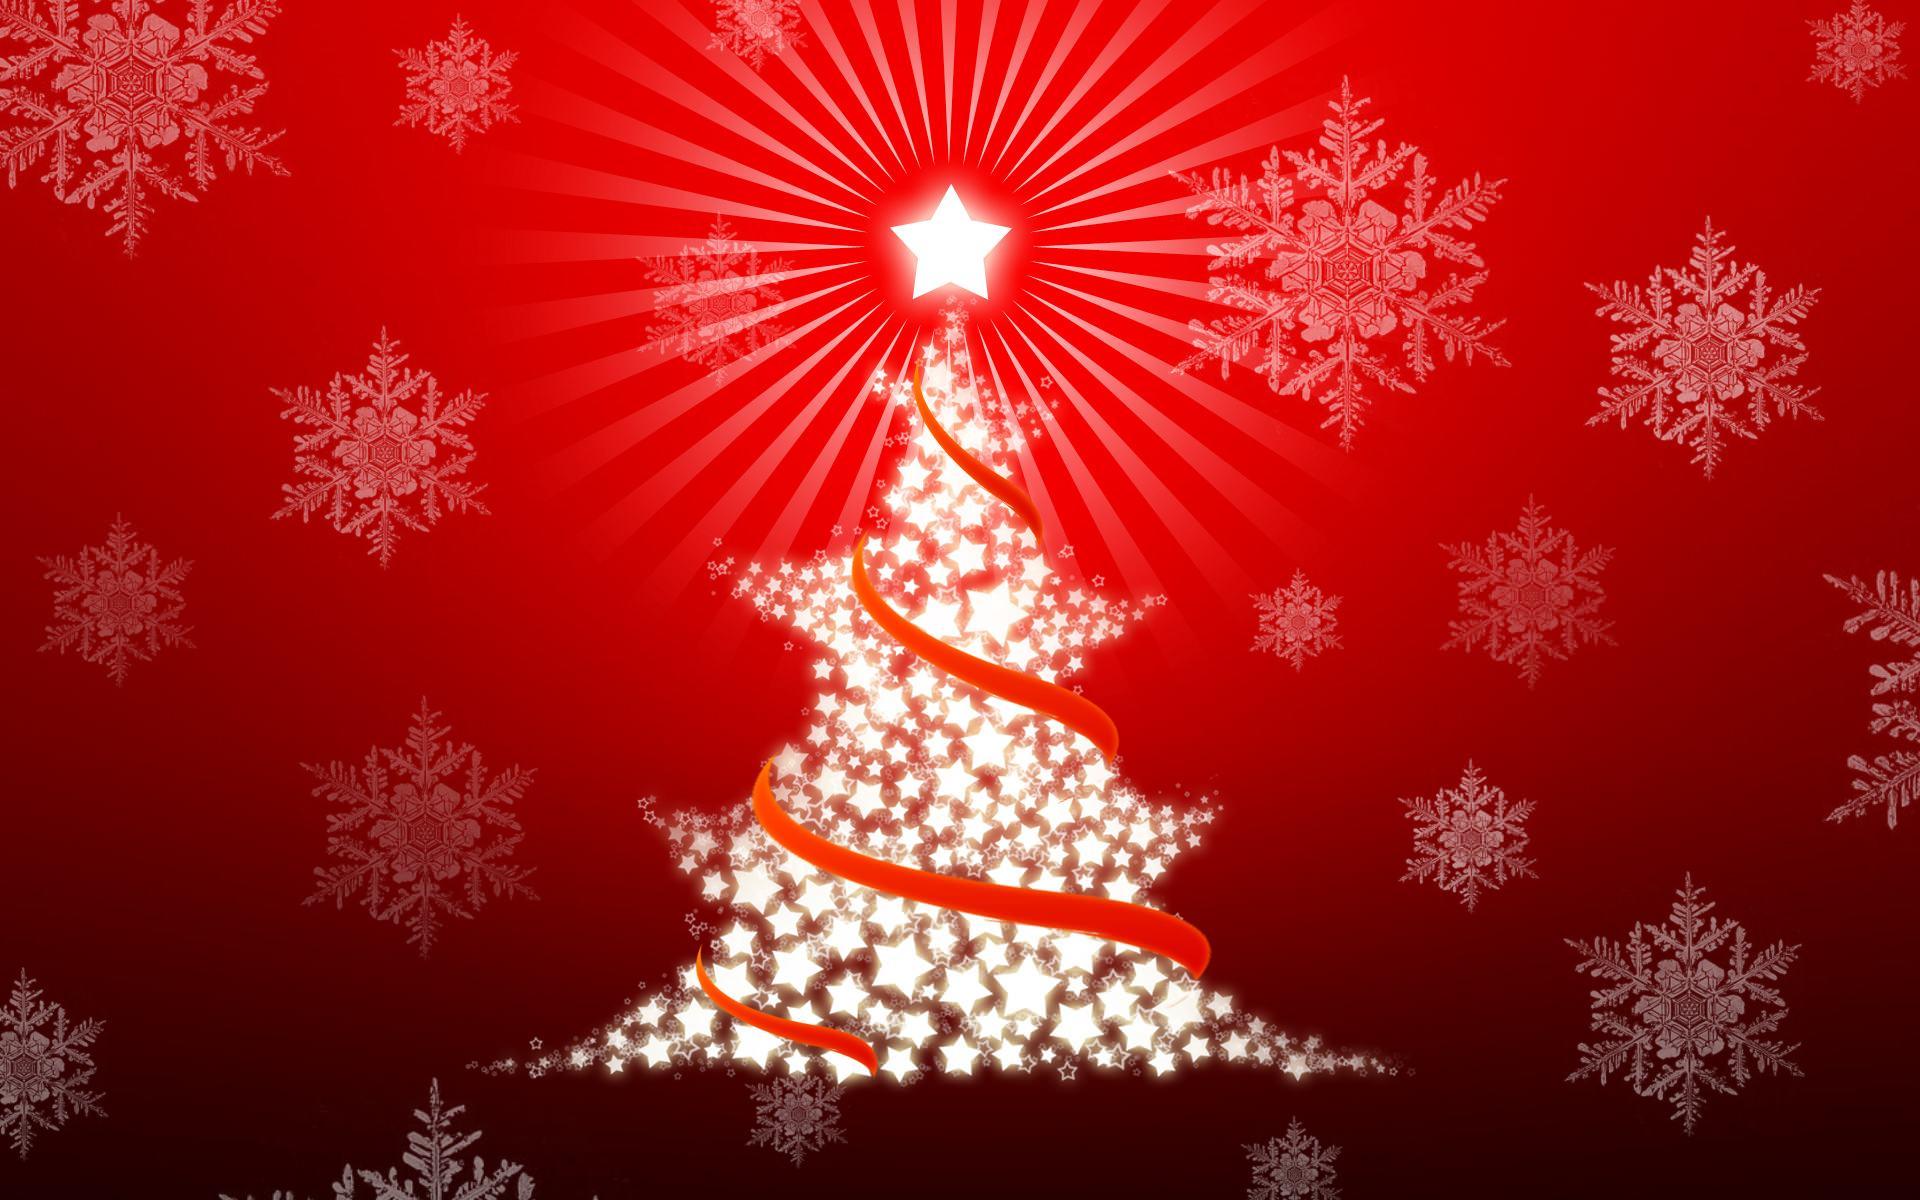 Image For > Cute Christmas Wallpapers Hd